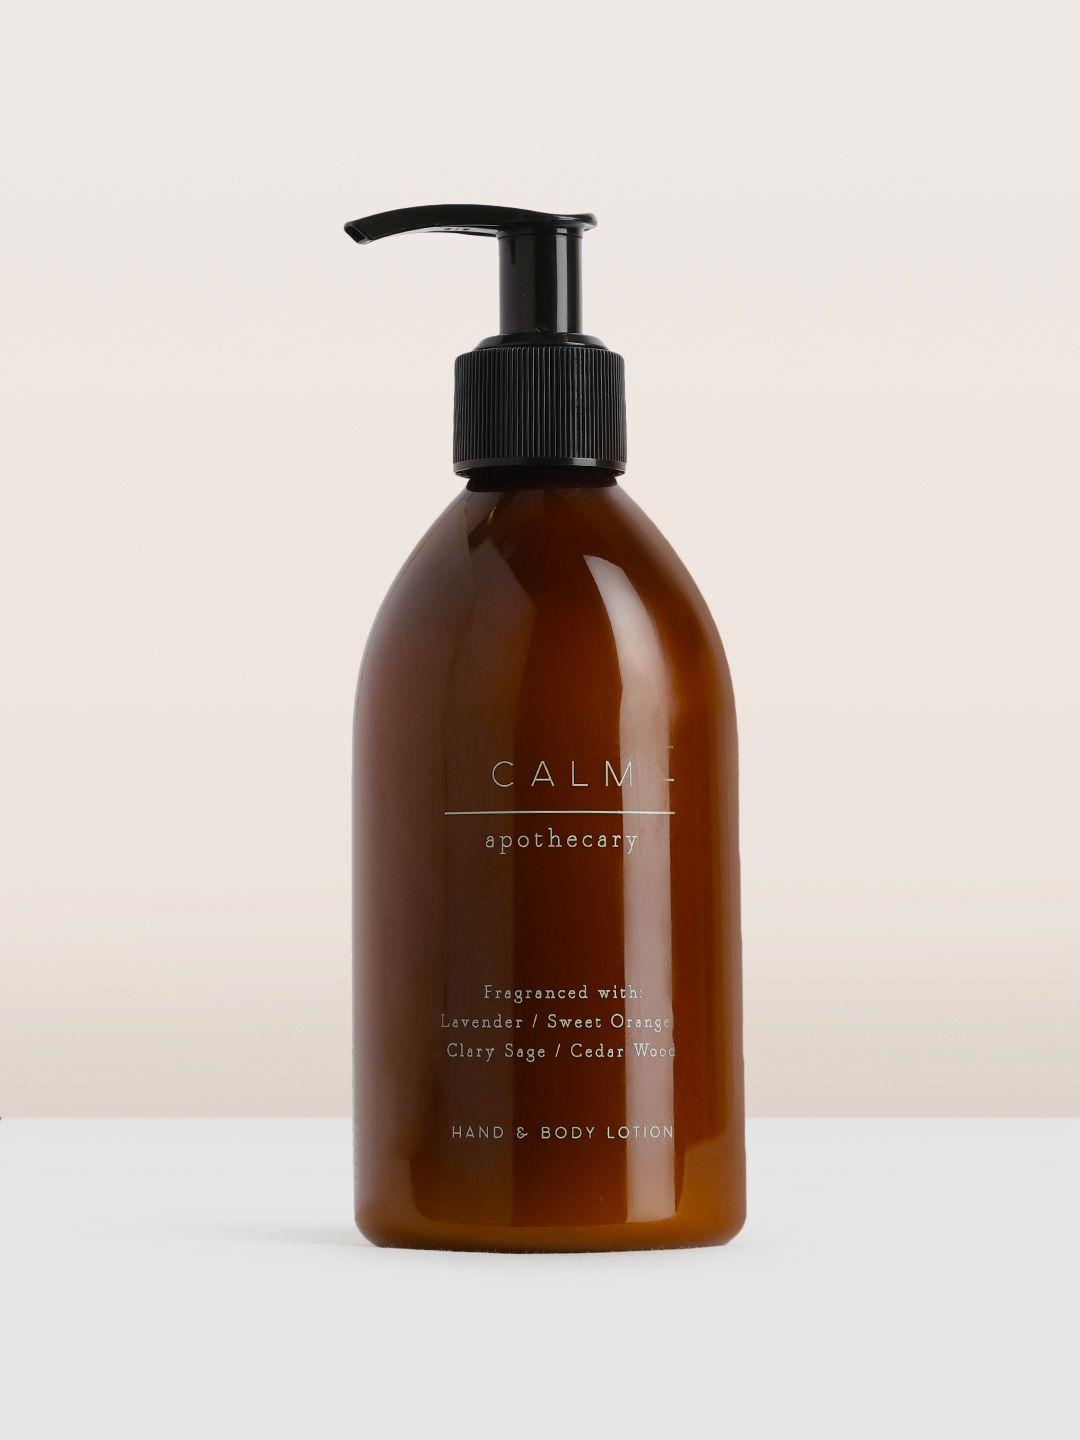 marks & spencer apothecary calm hand & body lotion 250ml